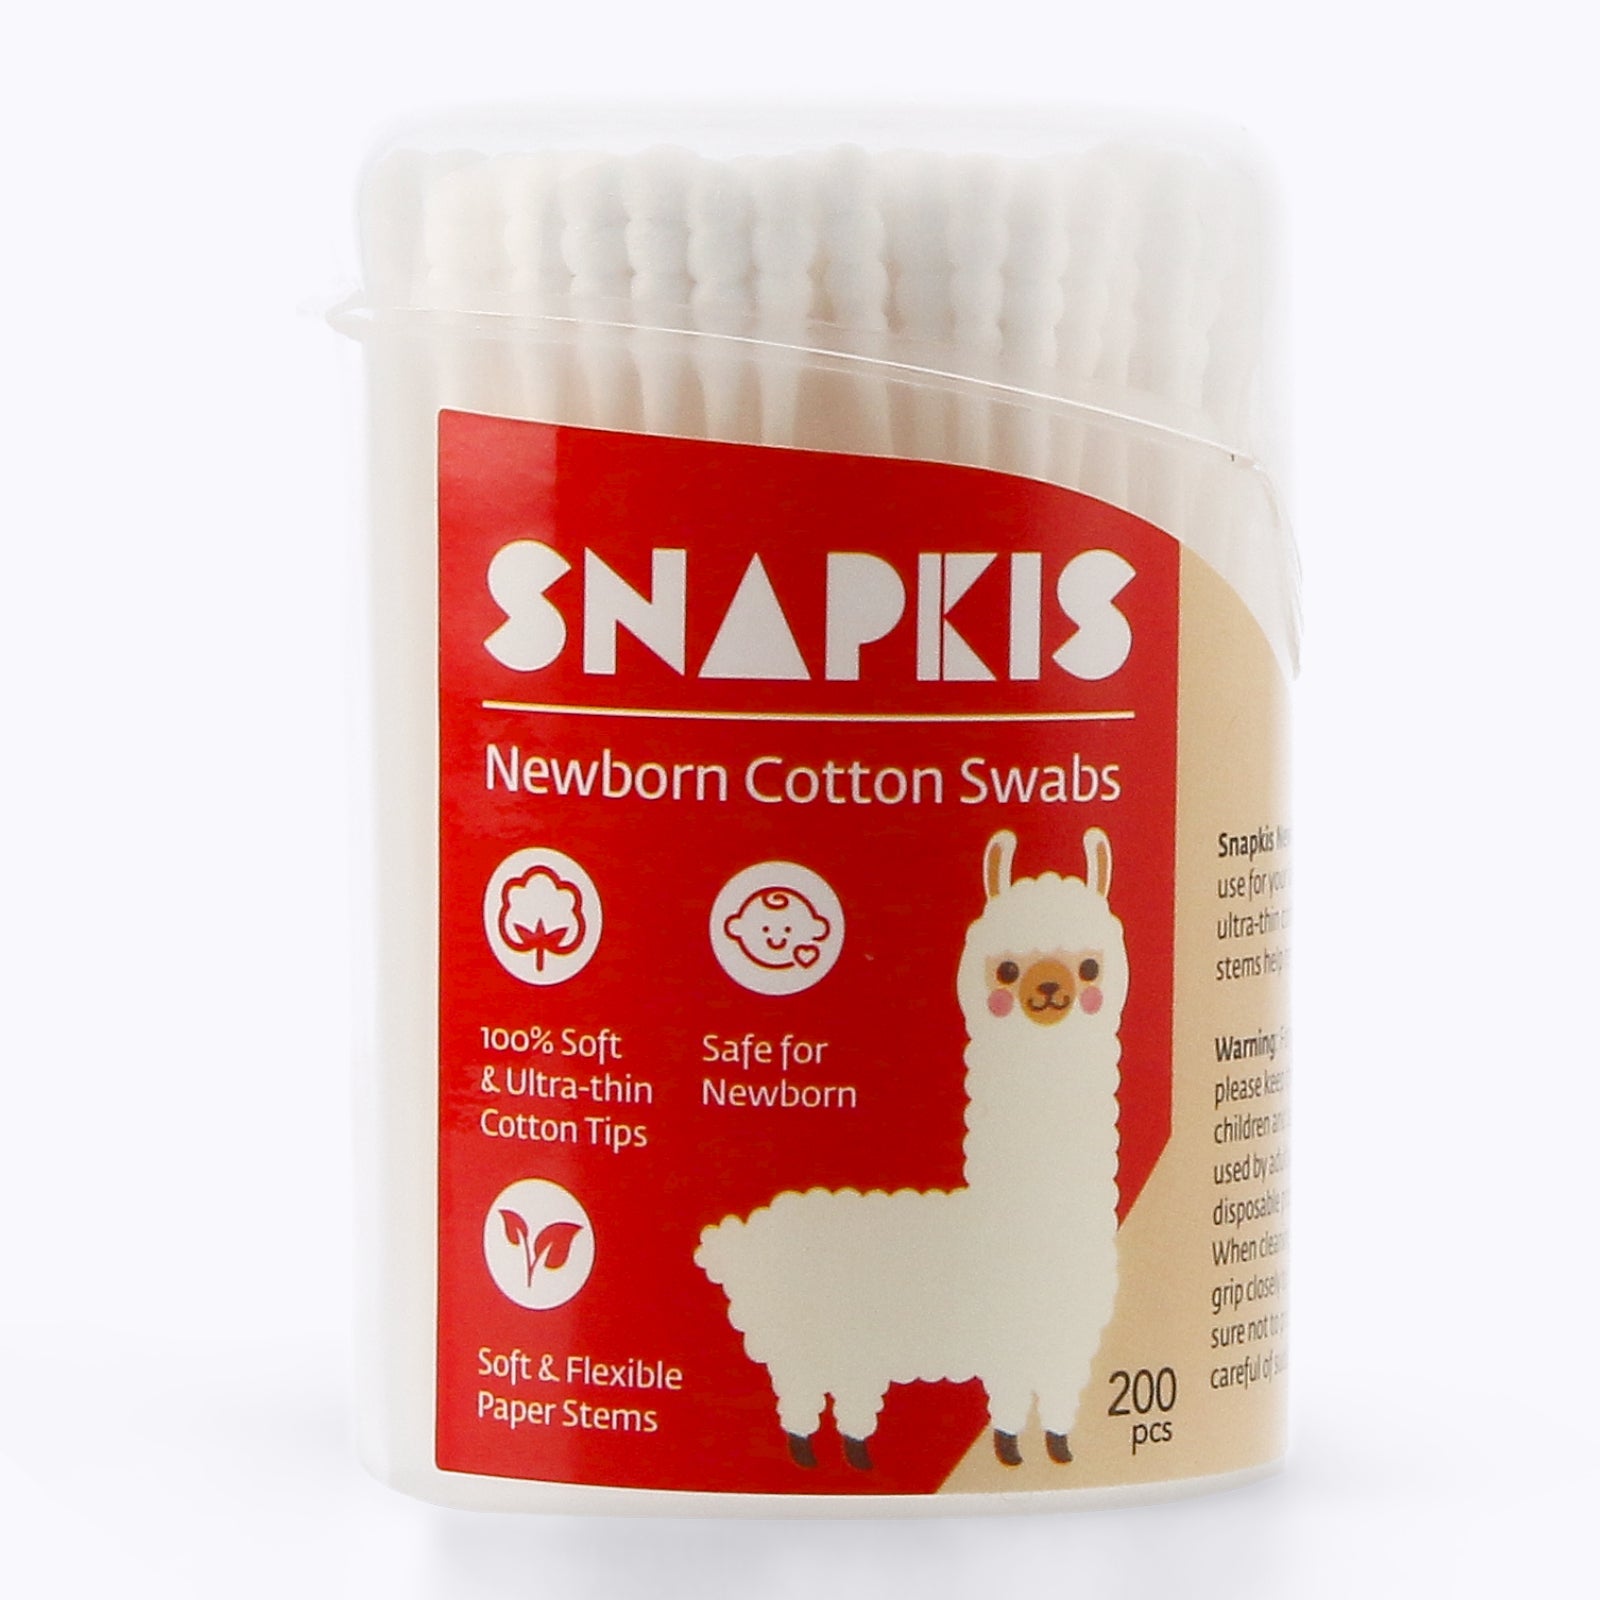 Newborn Cotton Swabs – Snapkis Official